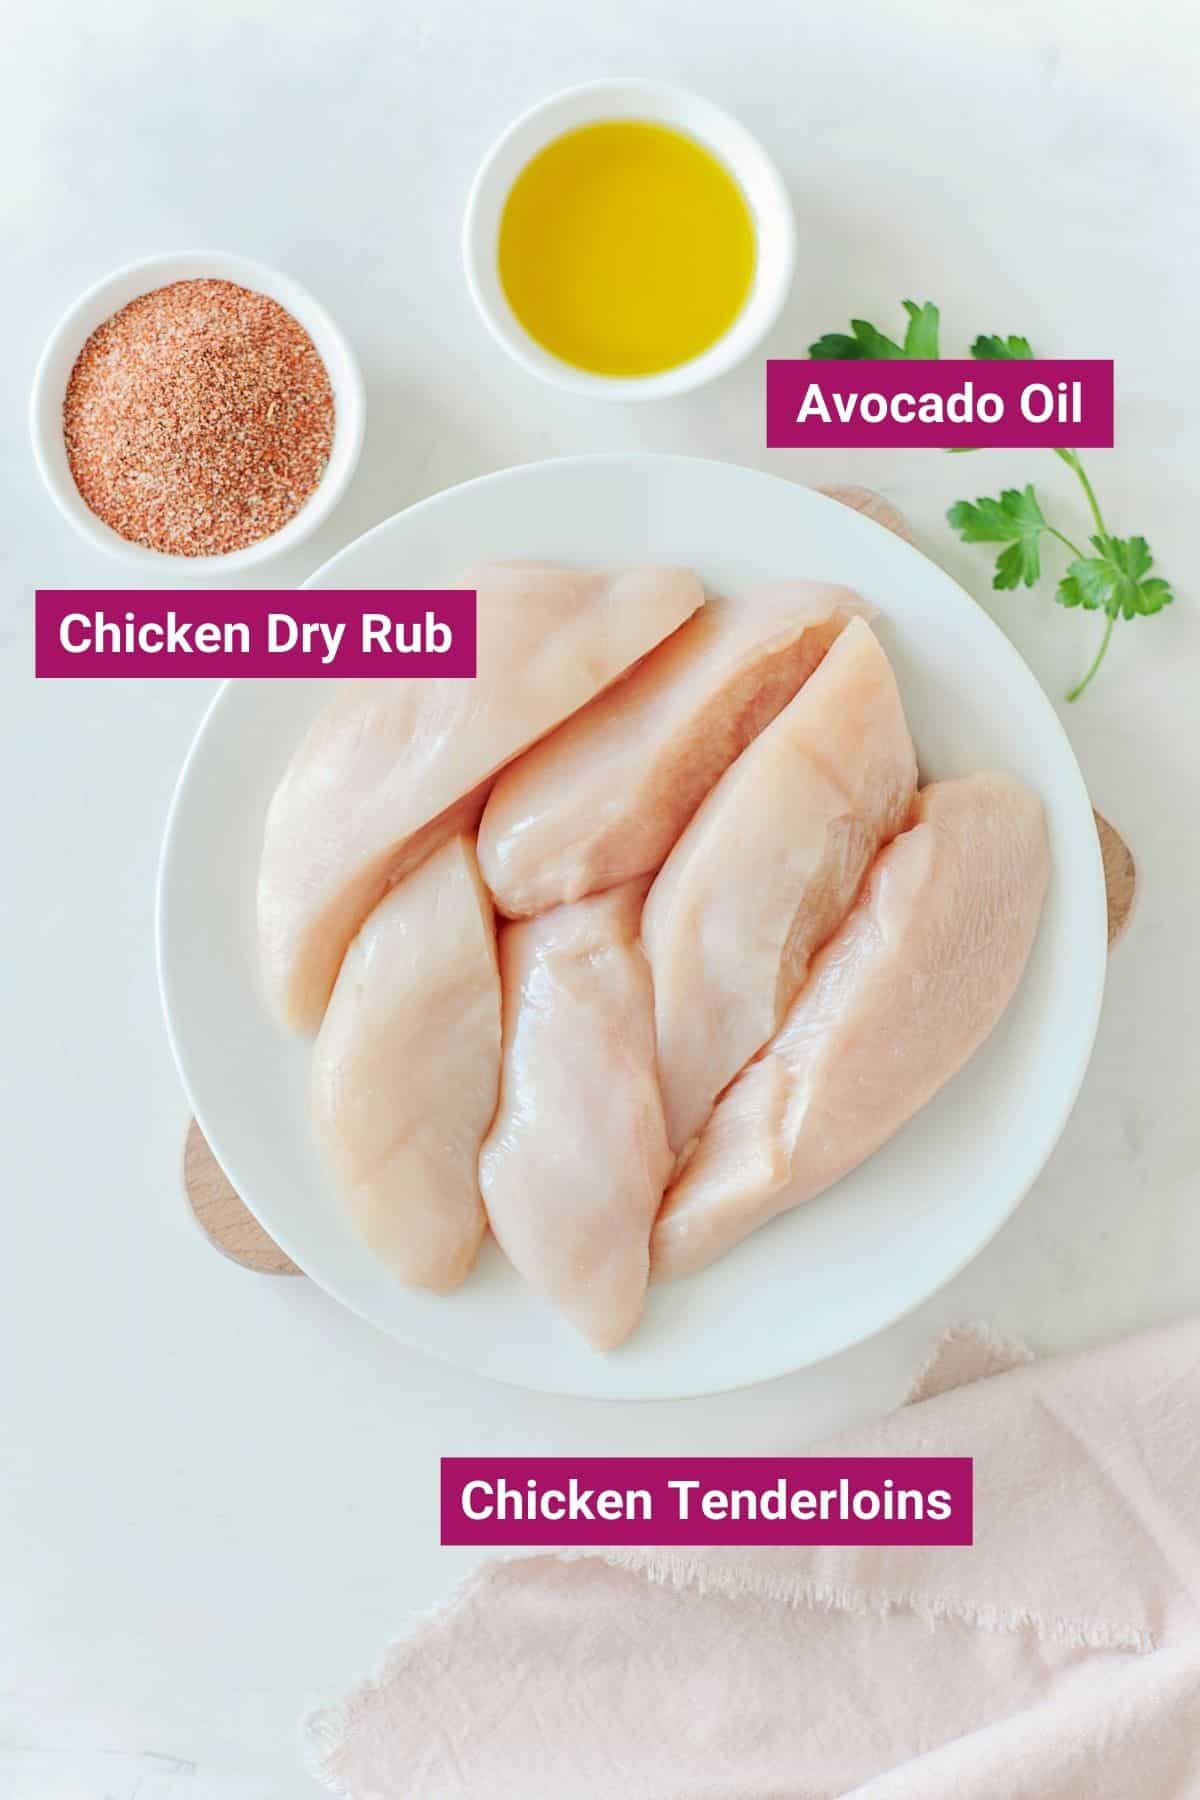 avocado oil and chicken dry rub on small bowls and chicken tenderloins on a large plate